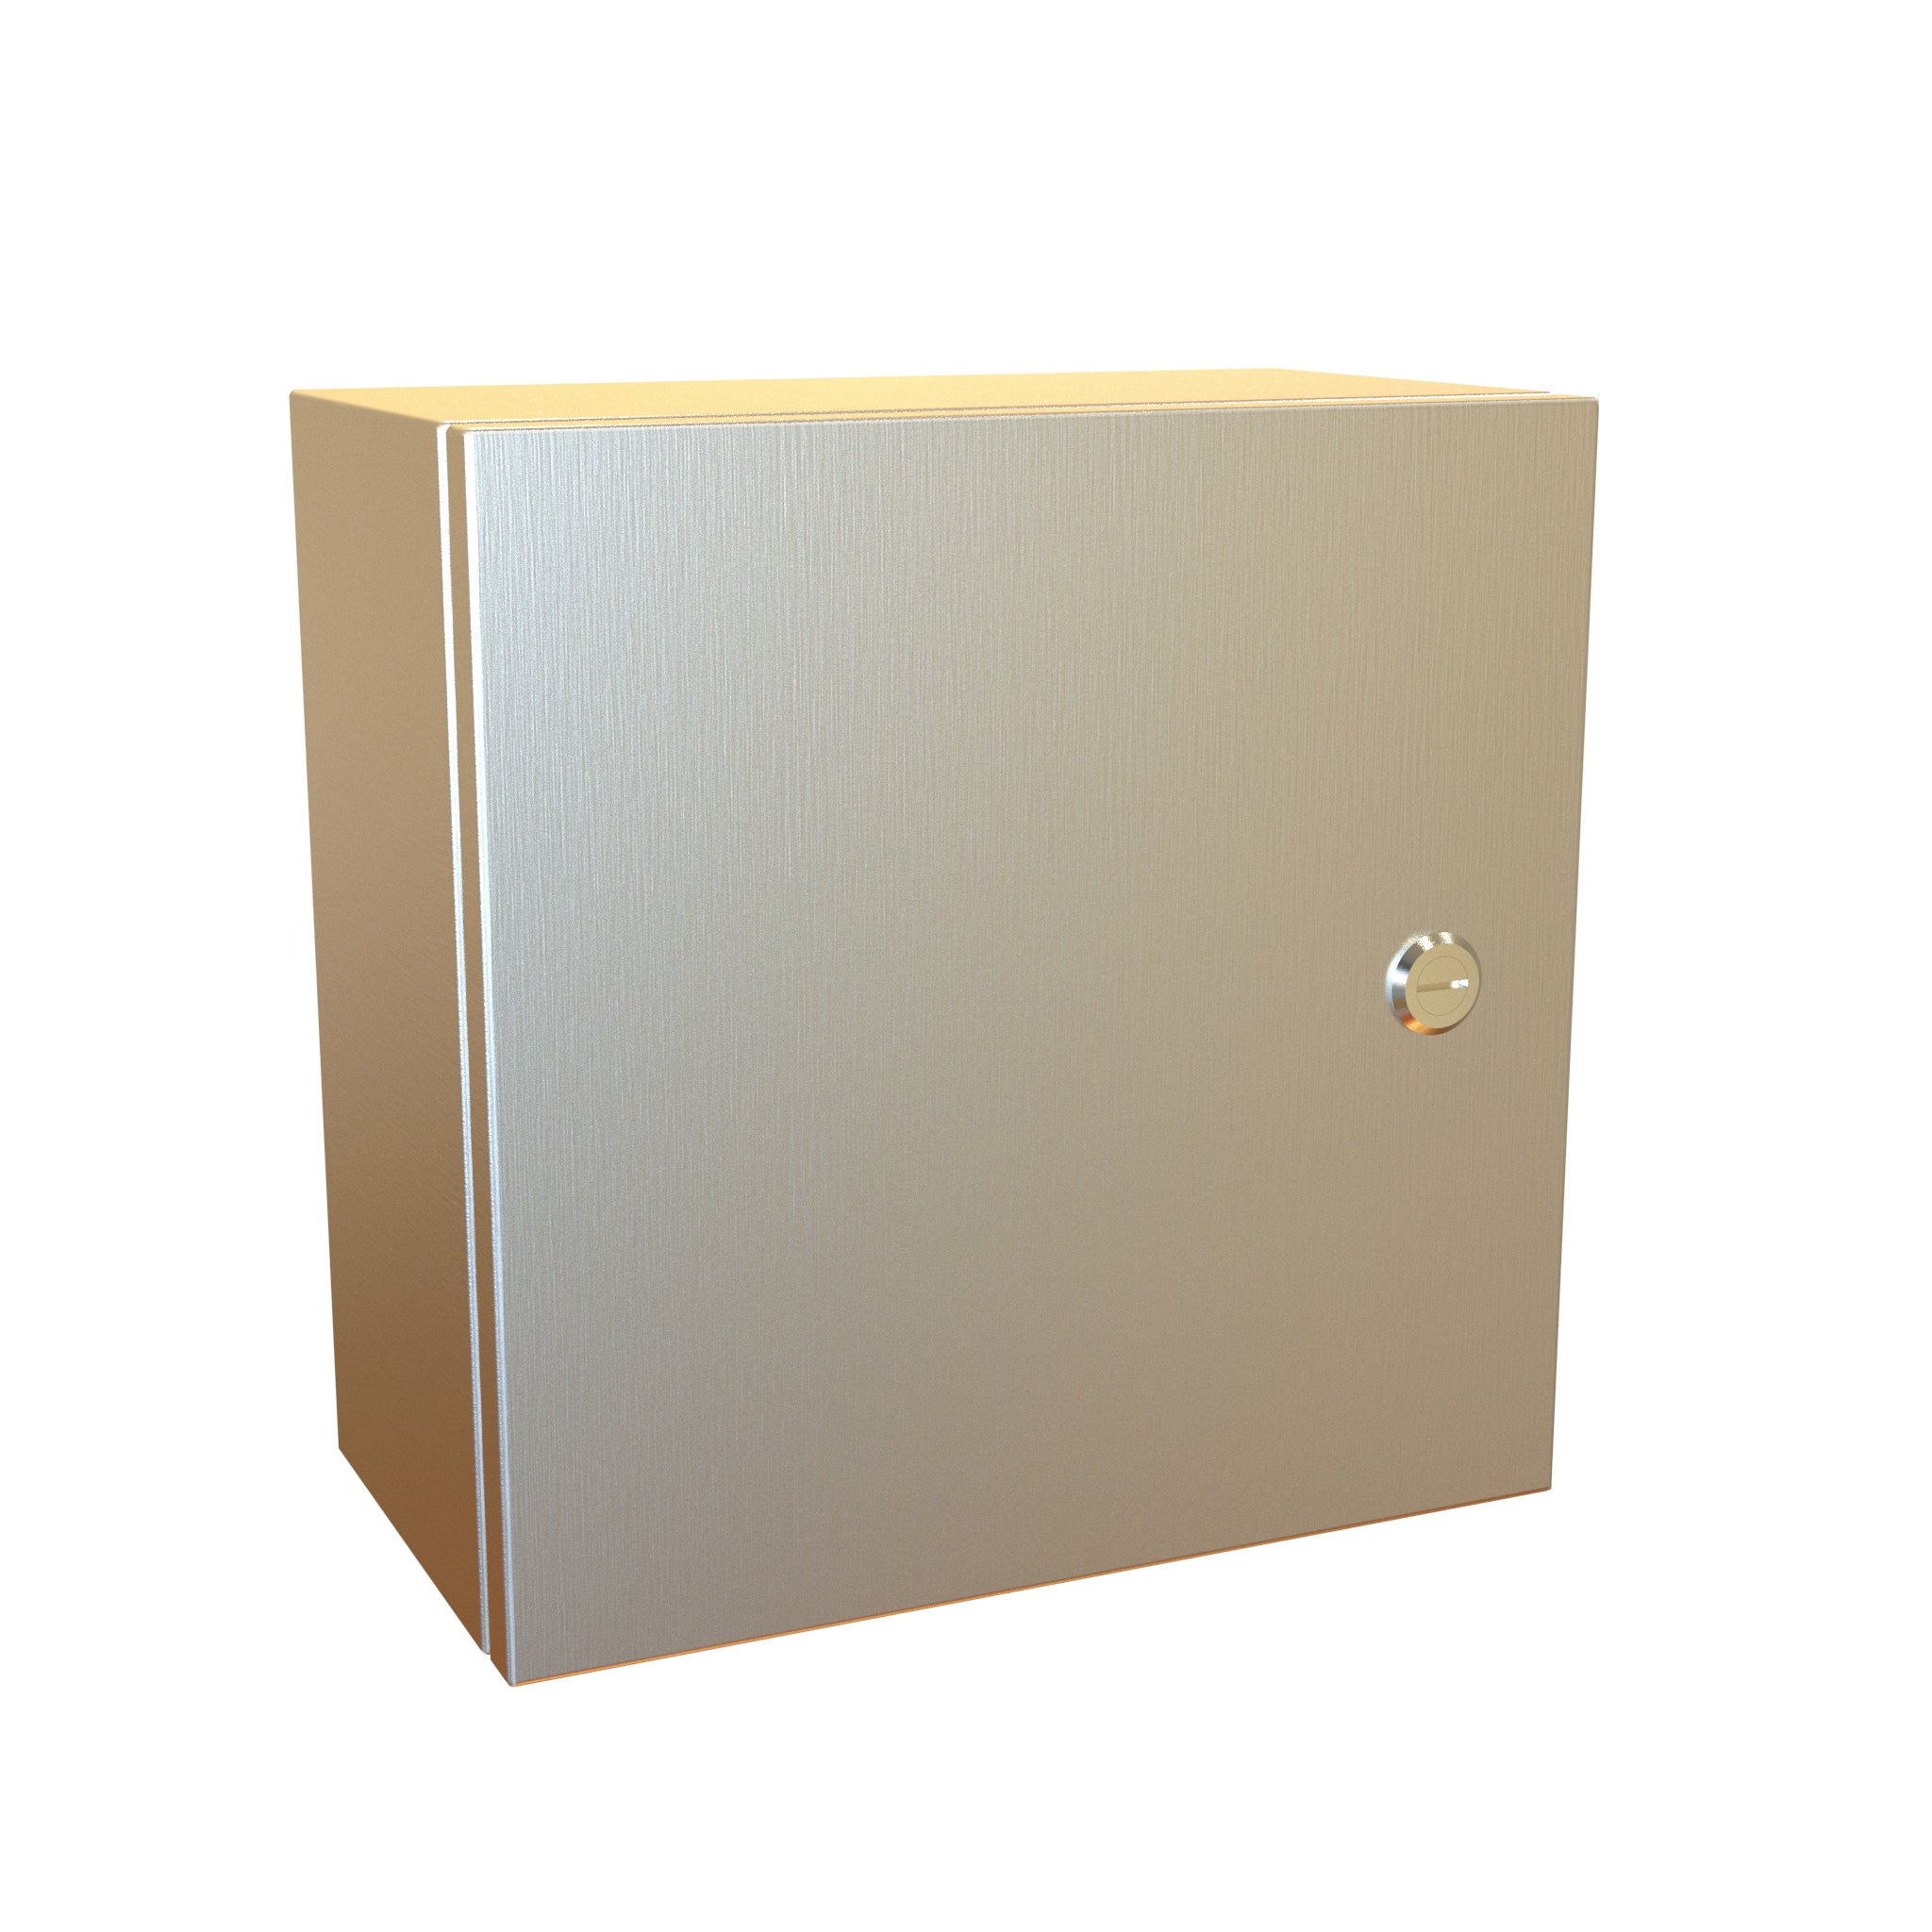 Type 4X Wallmount Enclosure Eclipse Series 316 Stainless Steel